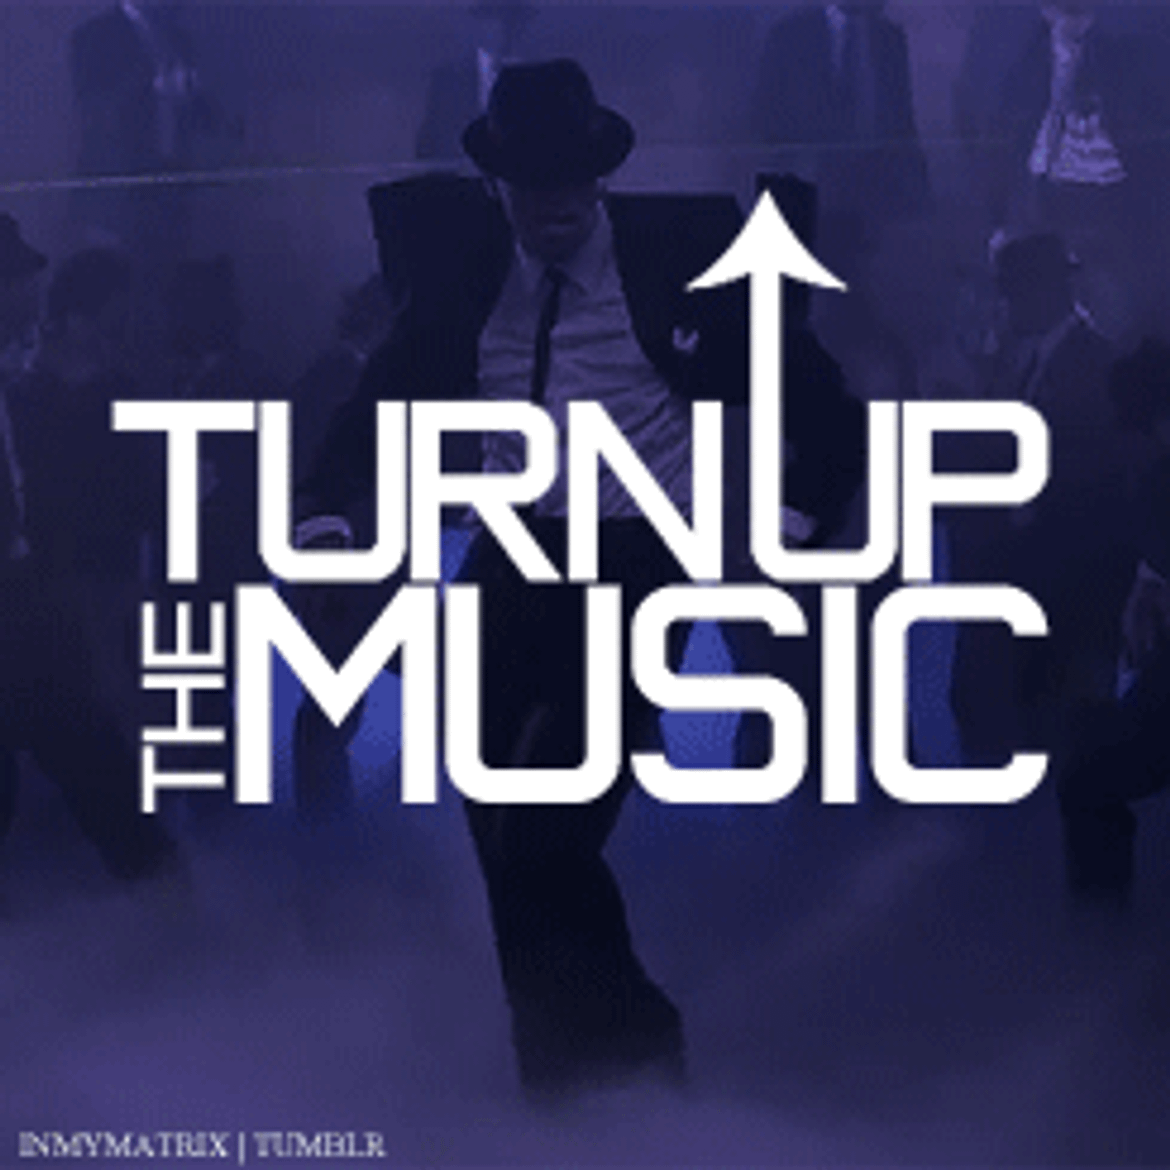 Can you turn the music. Turn up. Turn up the Music. Turn on the Music. Вектор turn the Music.